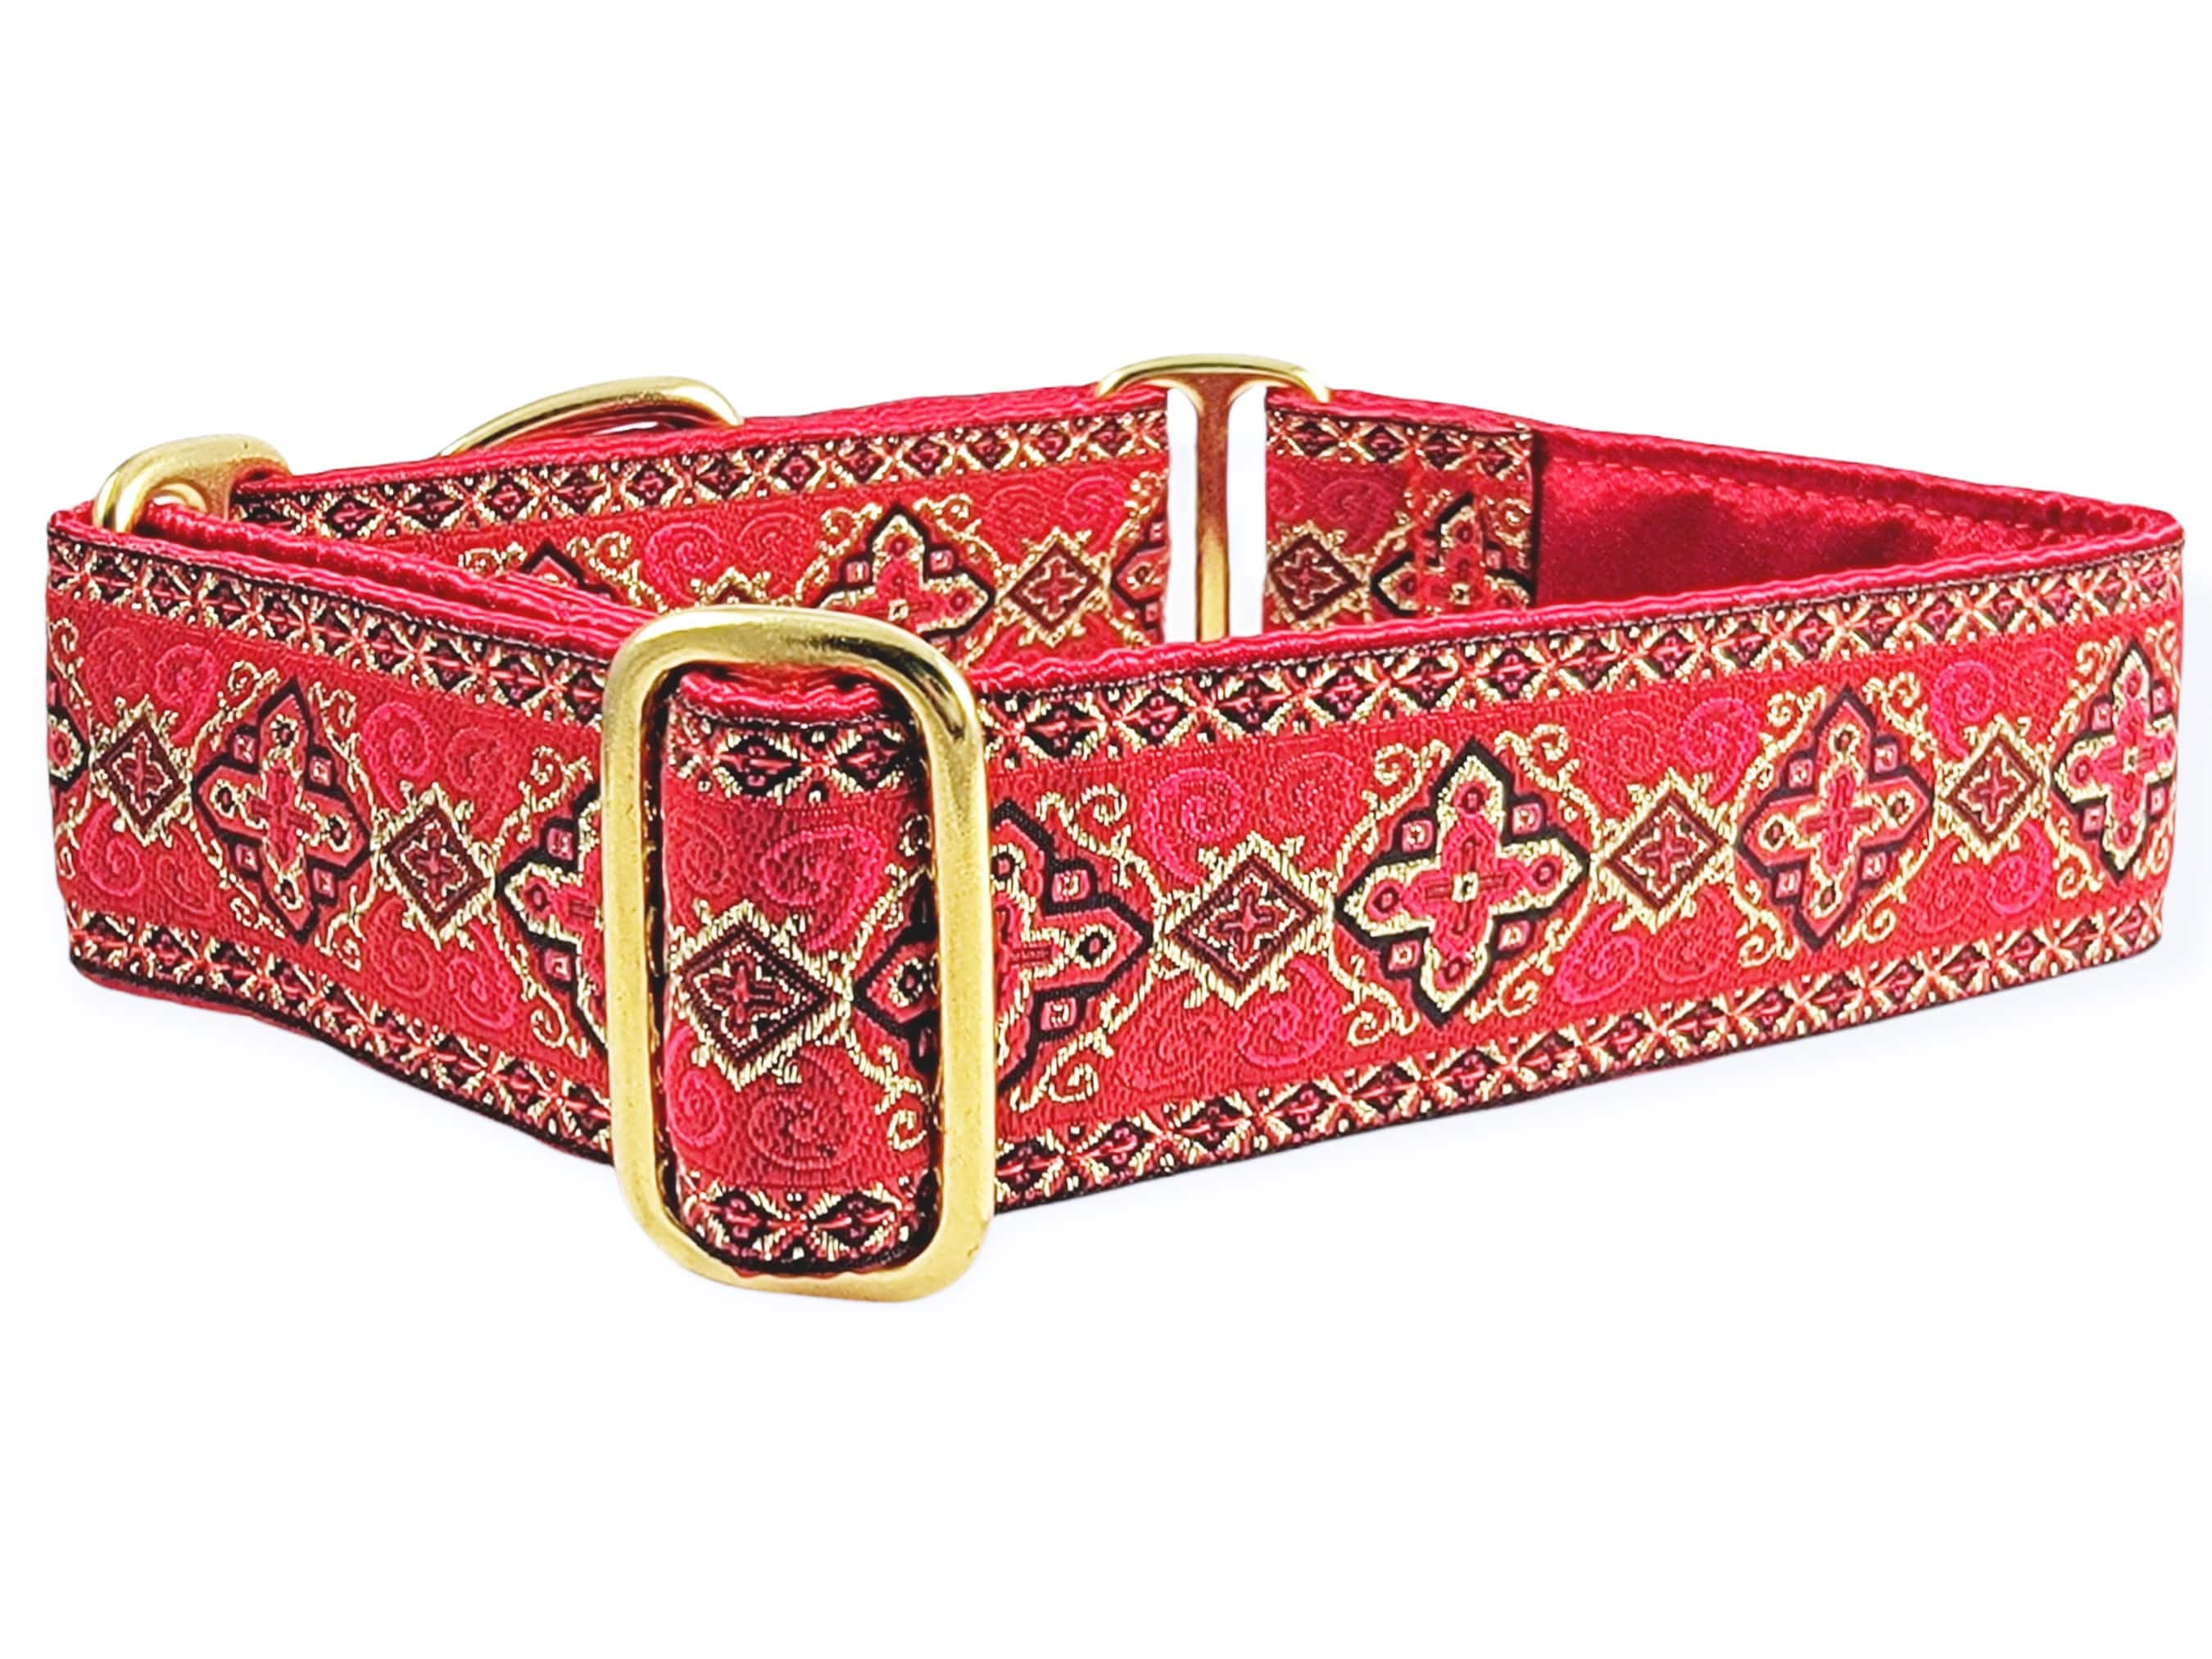 The Hound Haberdashery Collar Nobility in Red - Martingale Dog Collar or Buckle Dog Collar - 1.5" Width